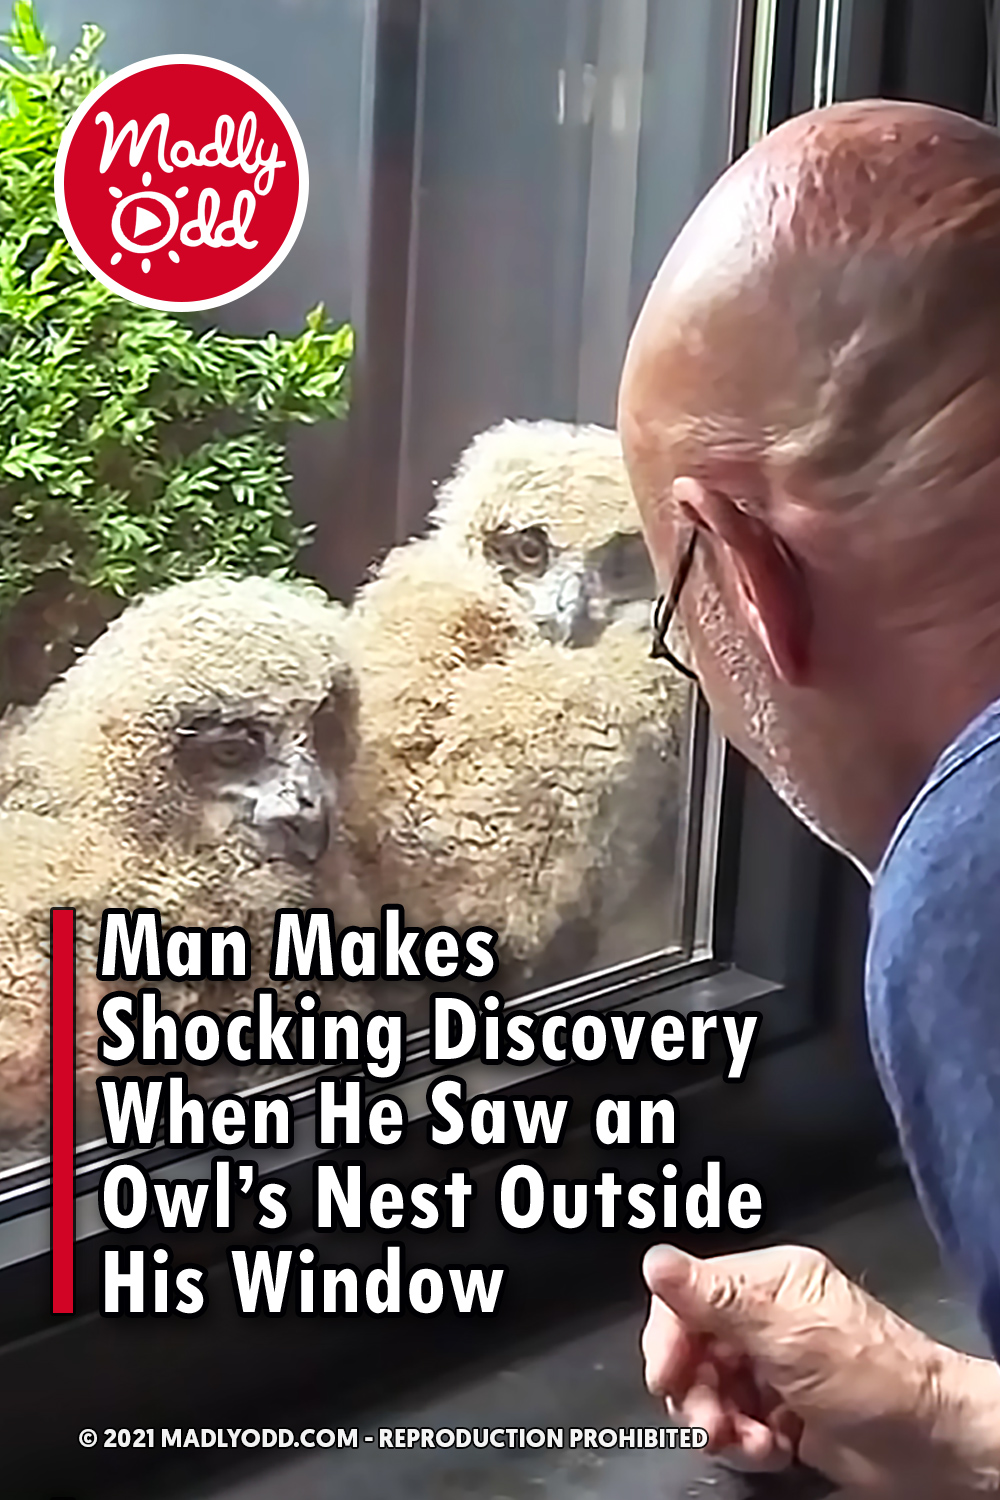 Man Makes Shocking Discovery When He Saw an Owl’s Nest Outside His Window